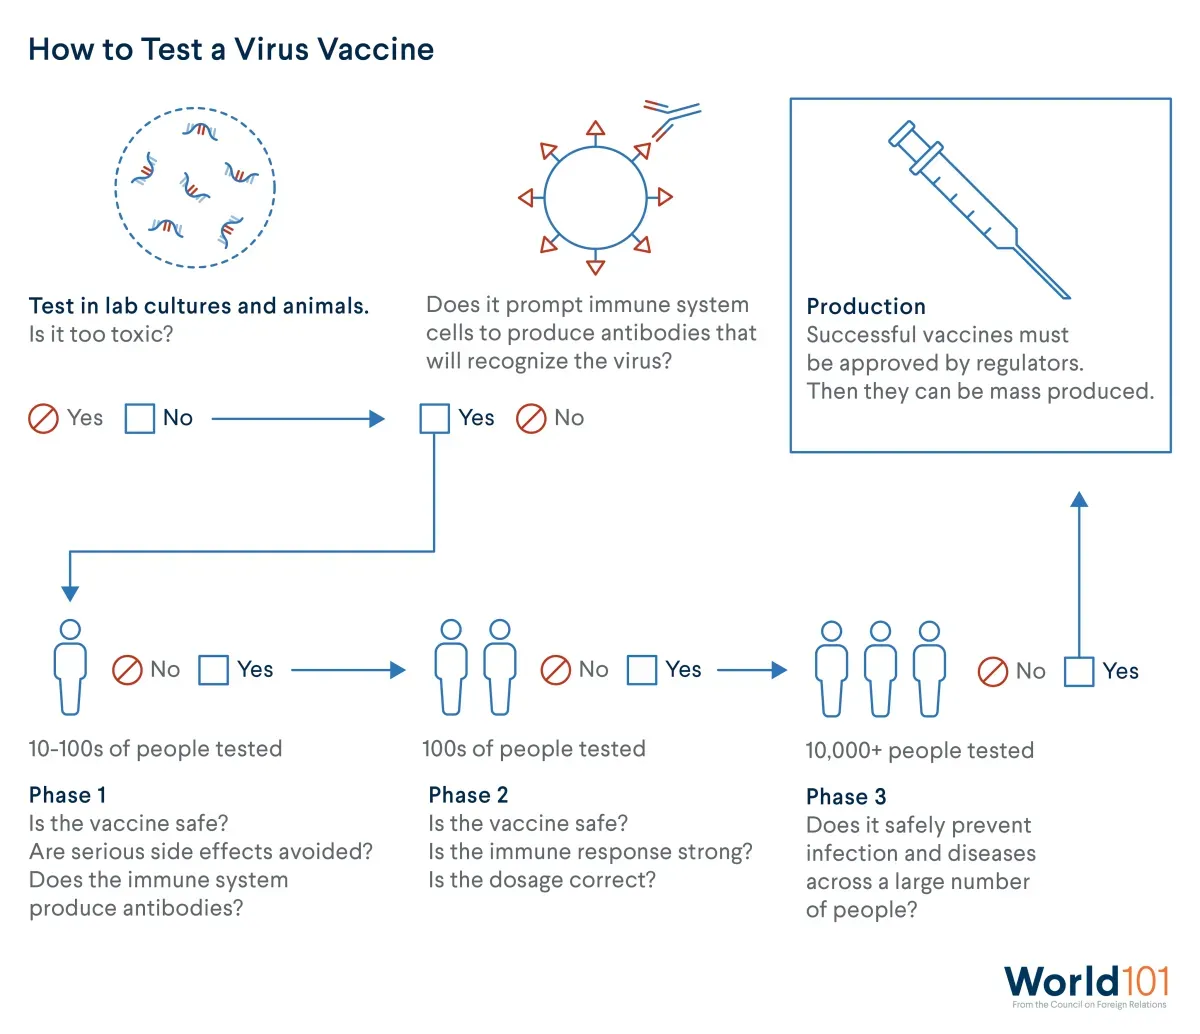 Graphic showing the different steps scientists take in order to test vaccines to make sure they're both safe and effective. For more info contact us at world101@cfr.org.